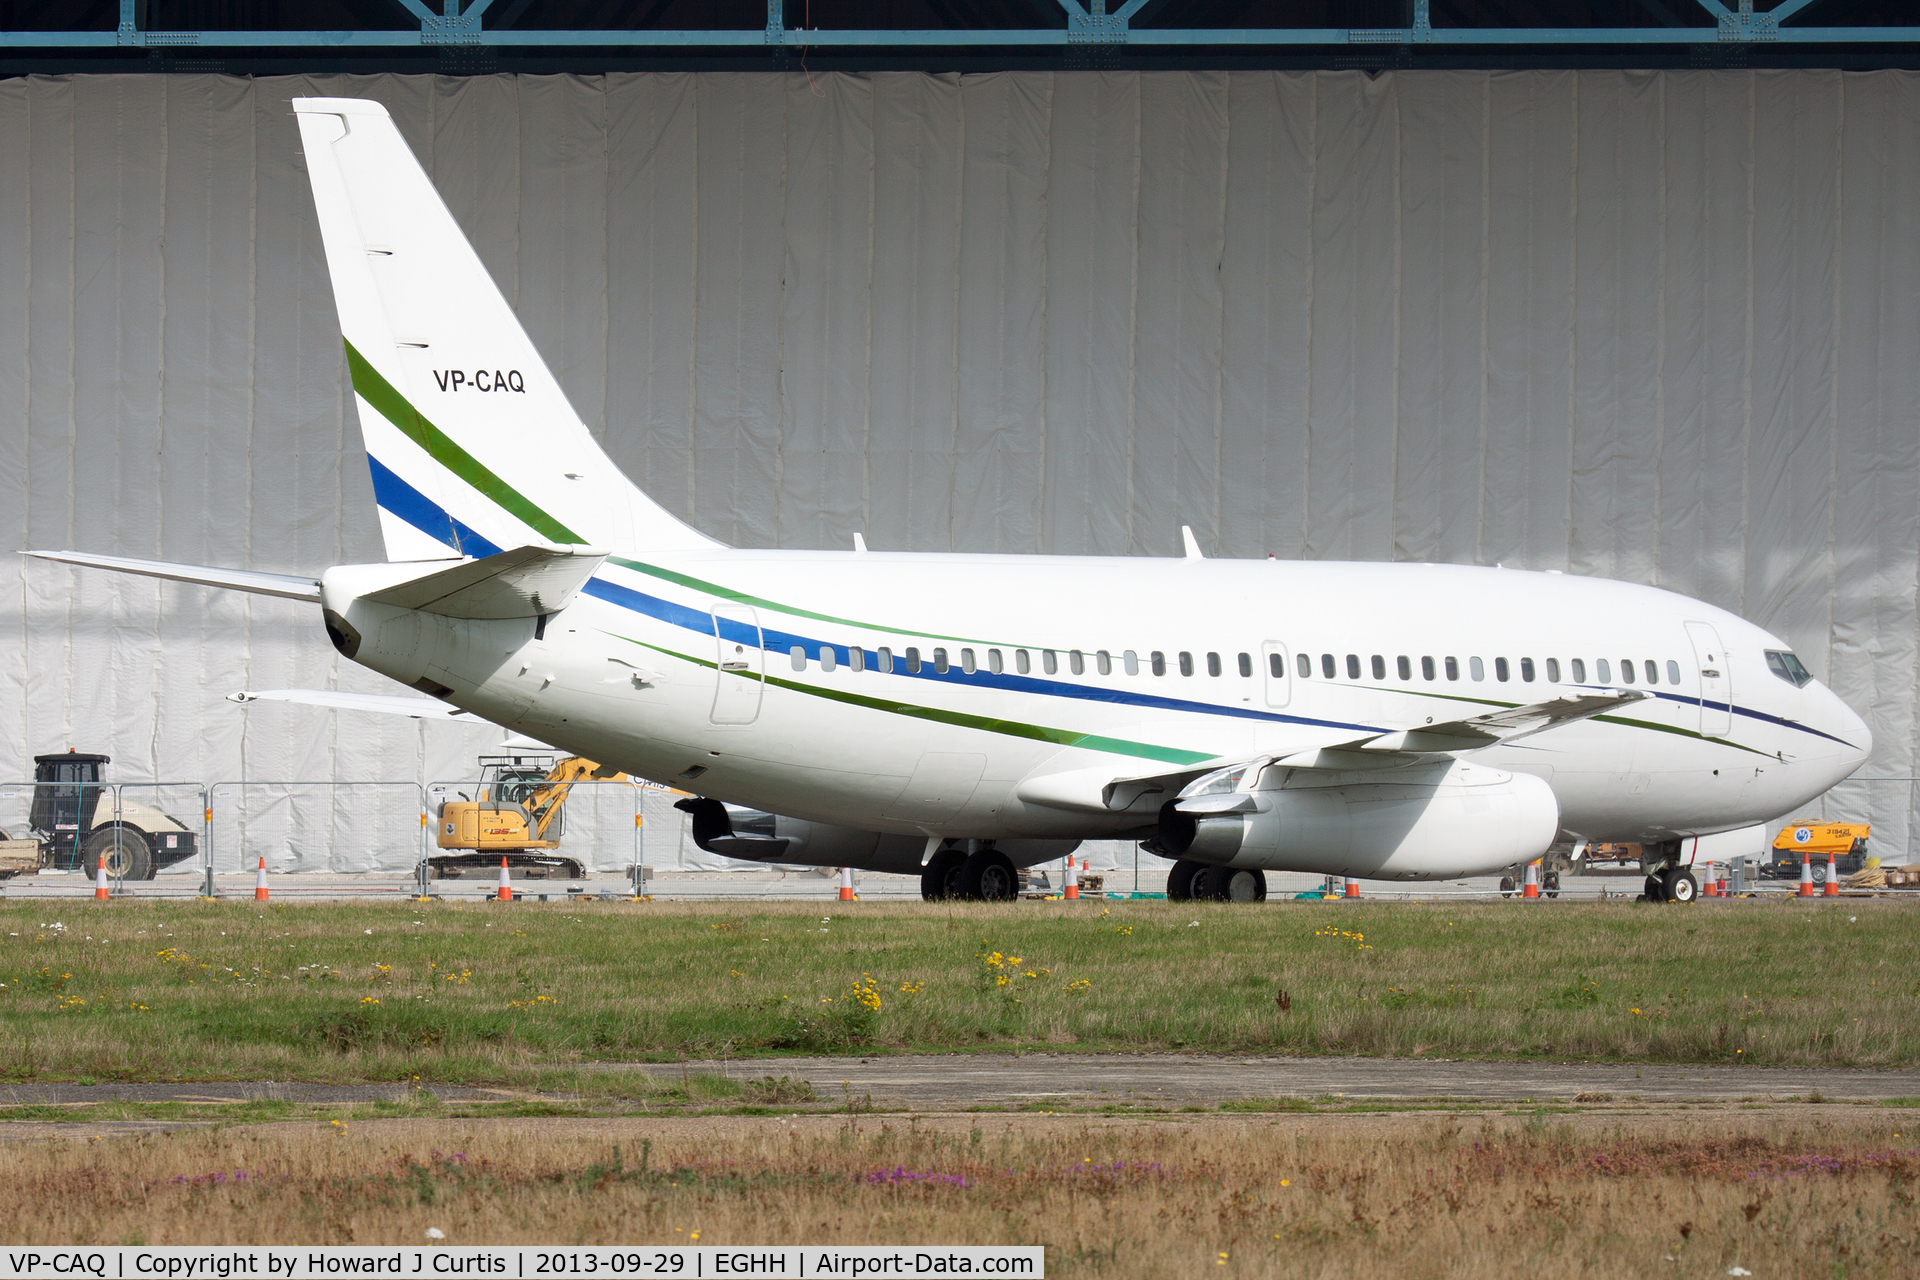 VP-CAQ, 1981 Boeing 737-2V6 C/N 22431, A frequent visitor here for maintenance.